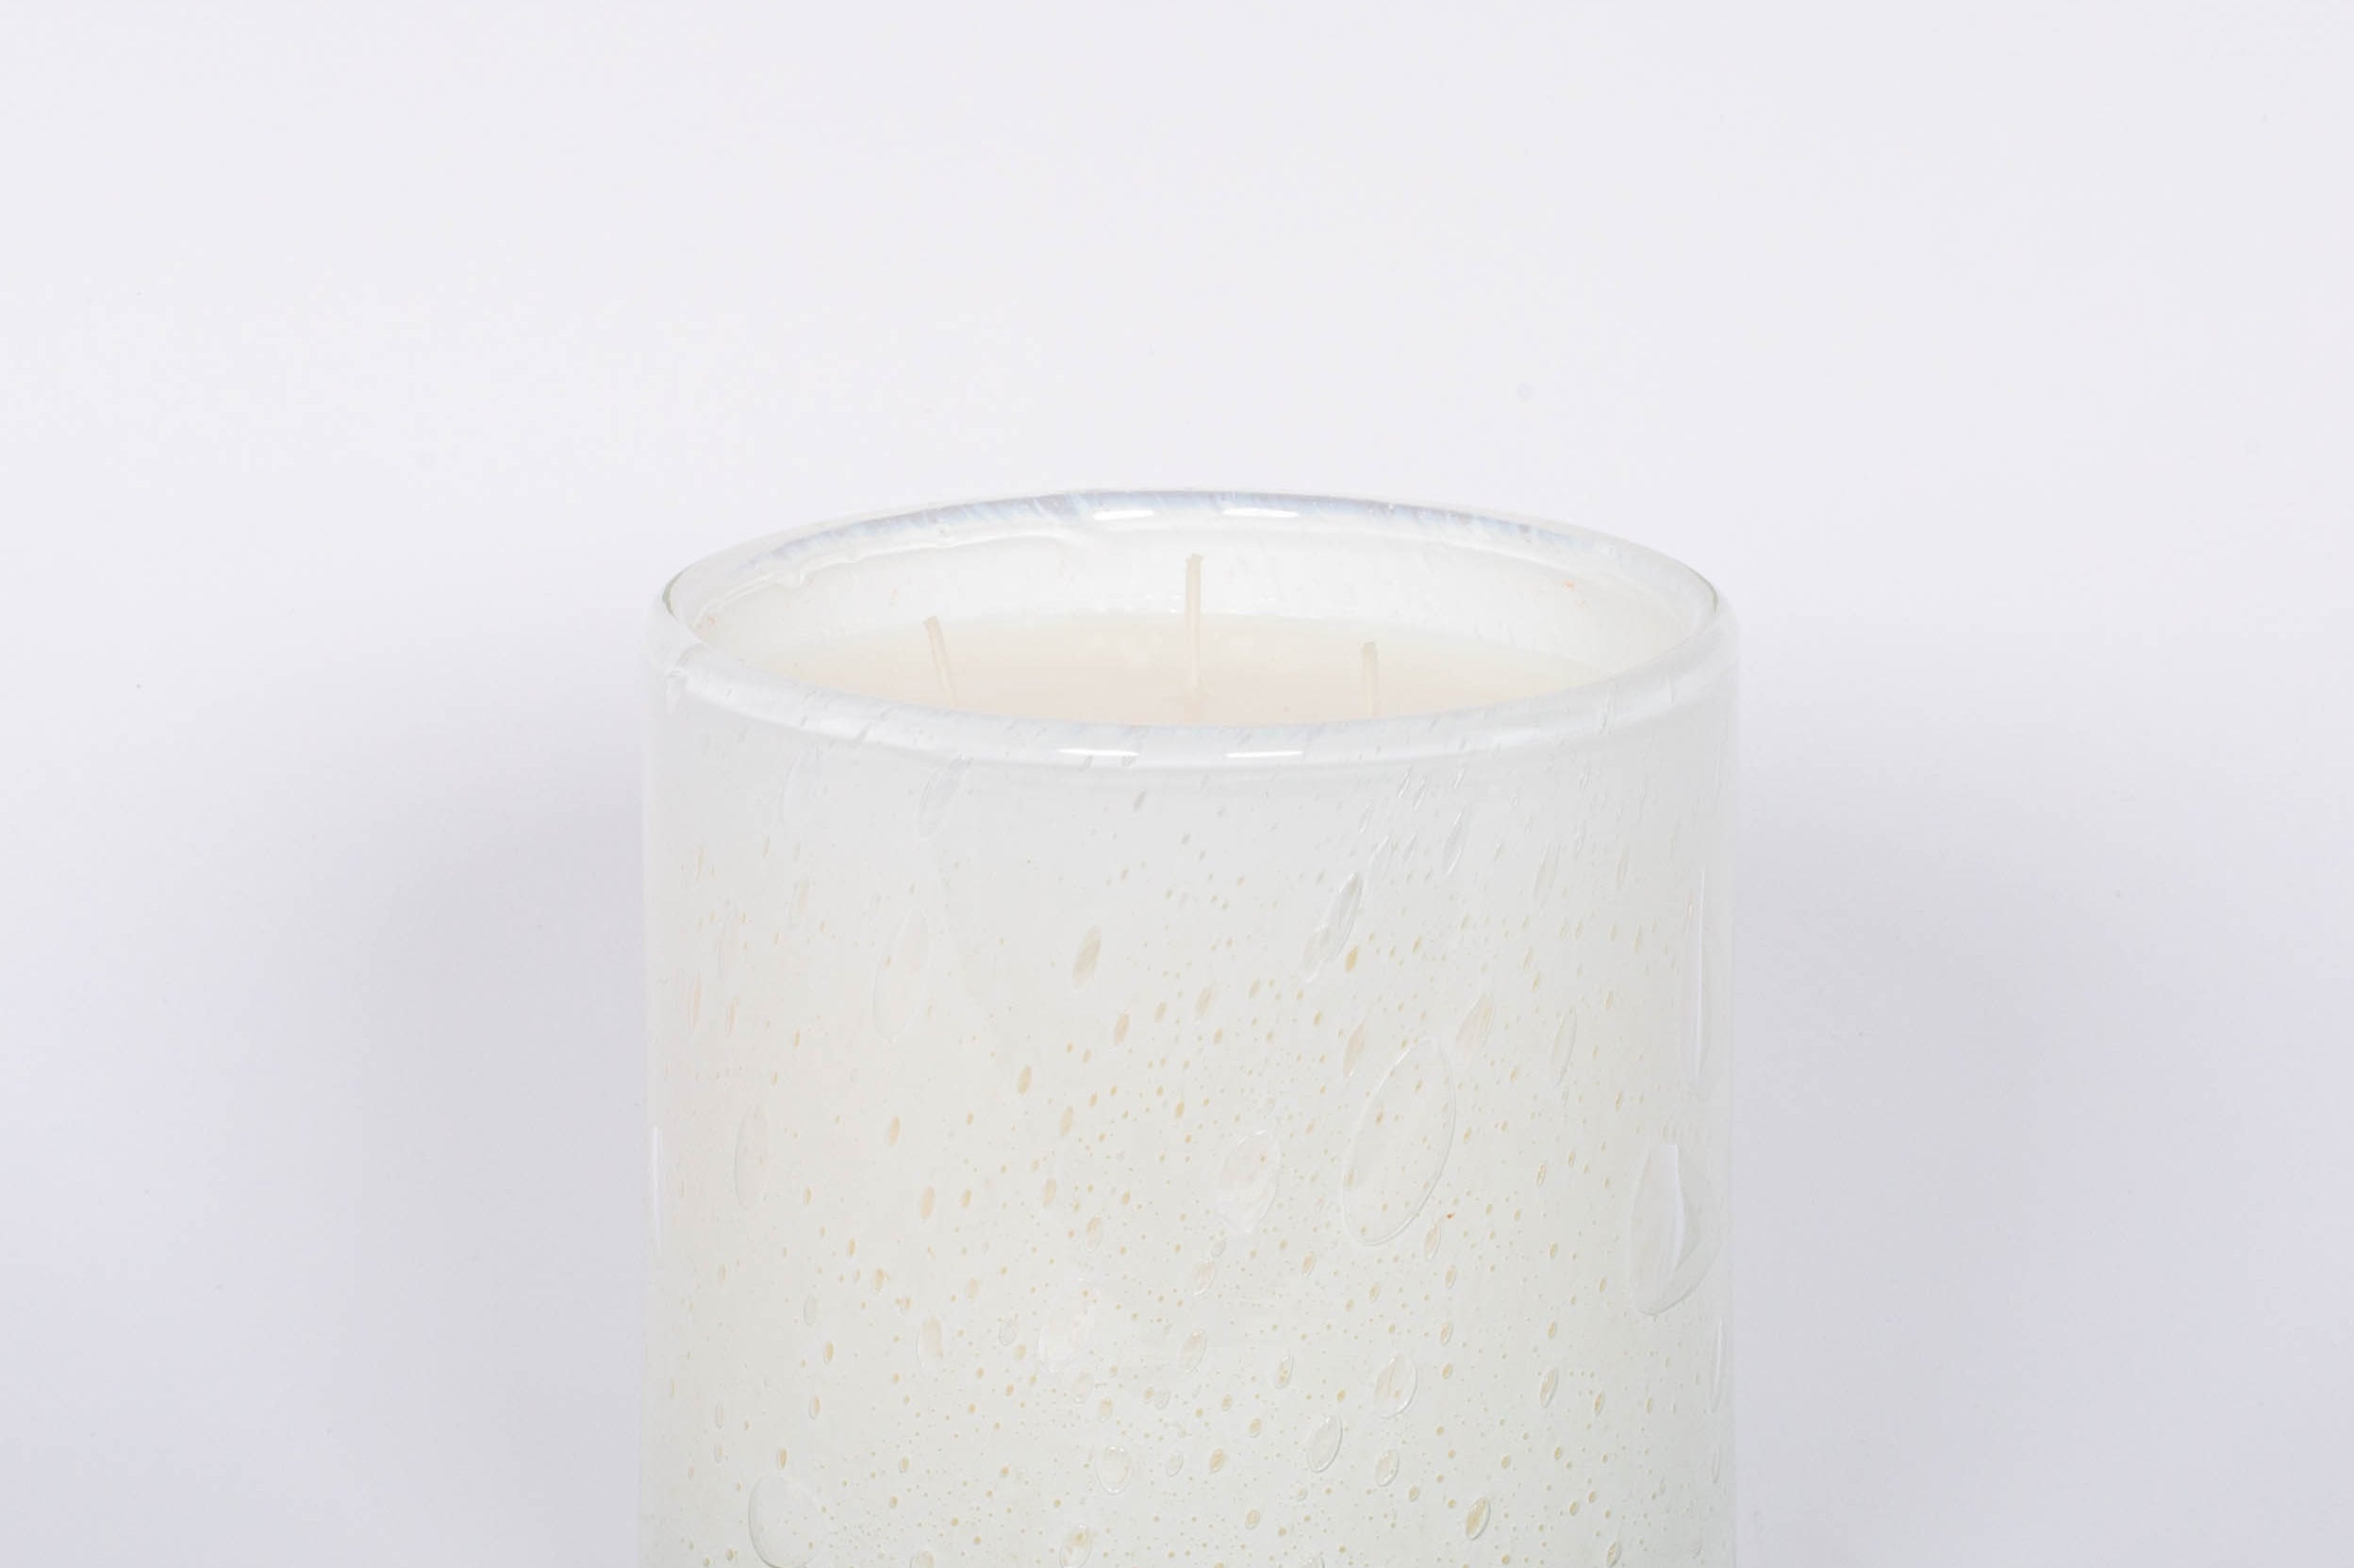 Fleur Blanche Cylindre white bubble glass candle by Alixx with moonflower and violet aroma. White background.